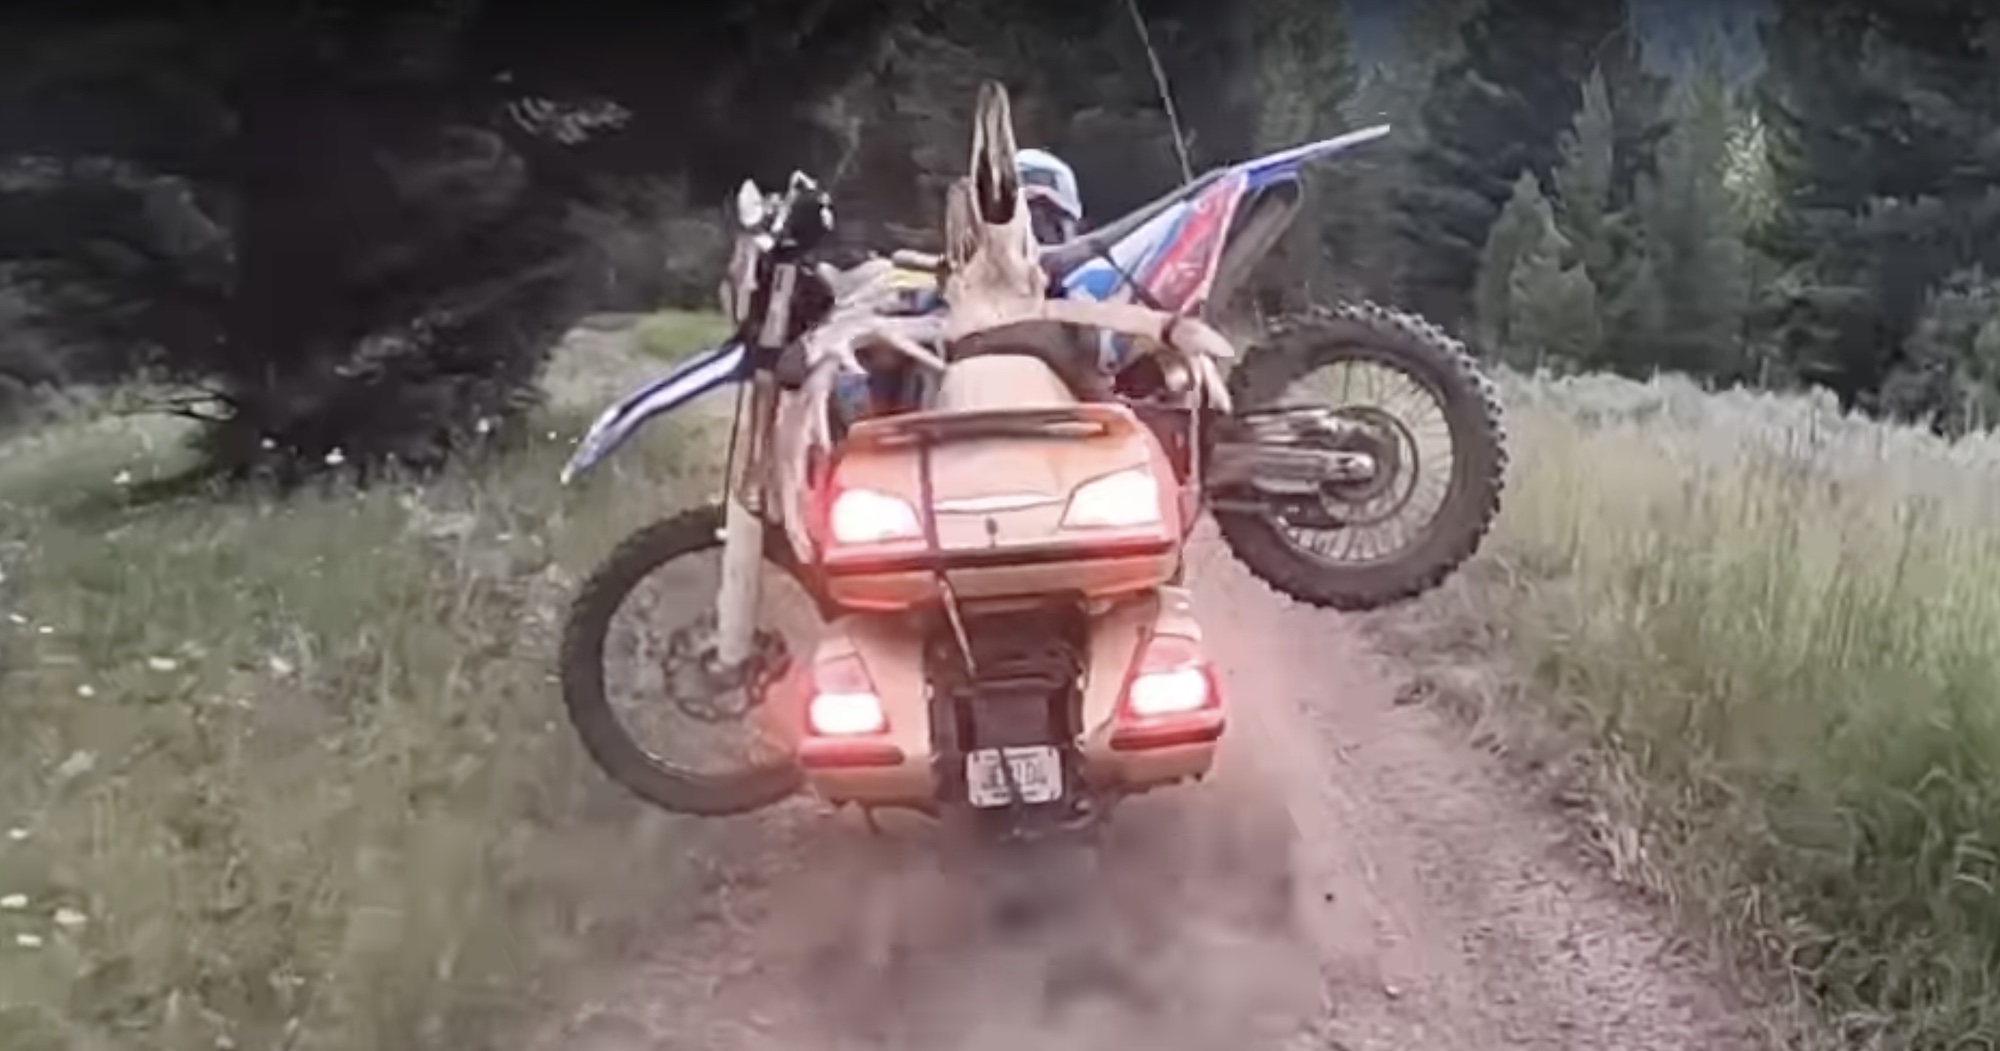 A view of a modded Honda Gold Wing off-roading a dirt bike to a local hilltop. Media sourced from Youtube.